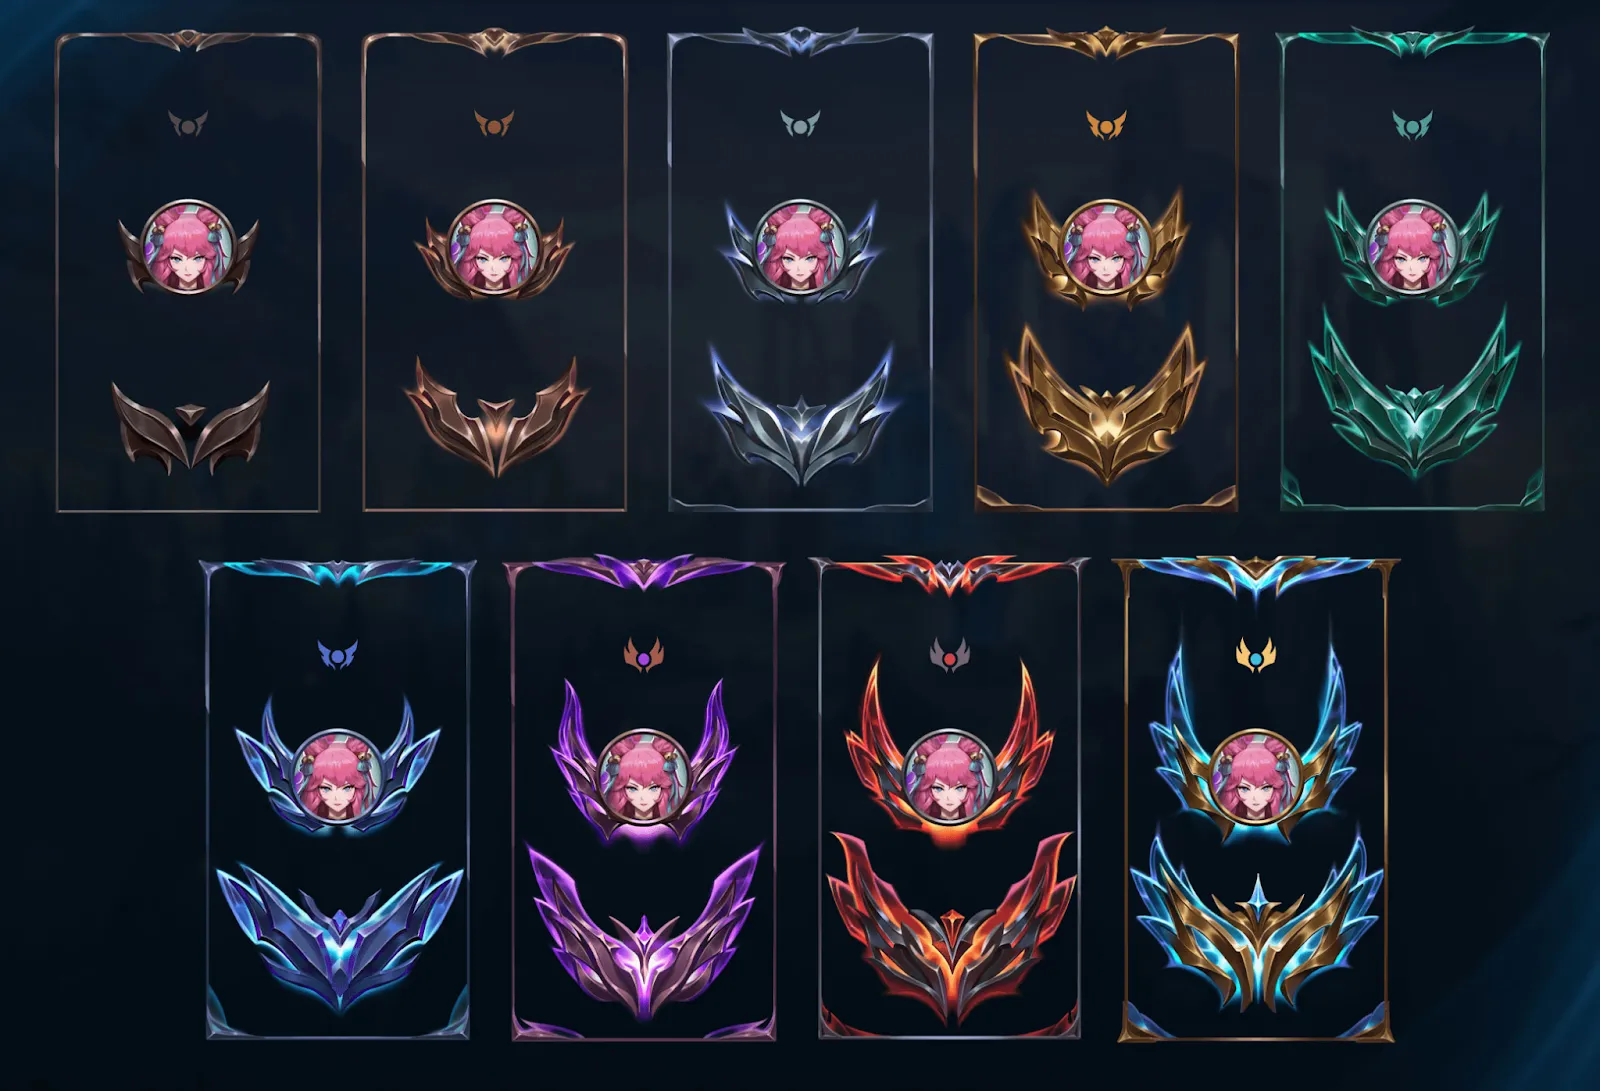 The New Frames for the League of Legends Ranked Divisions